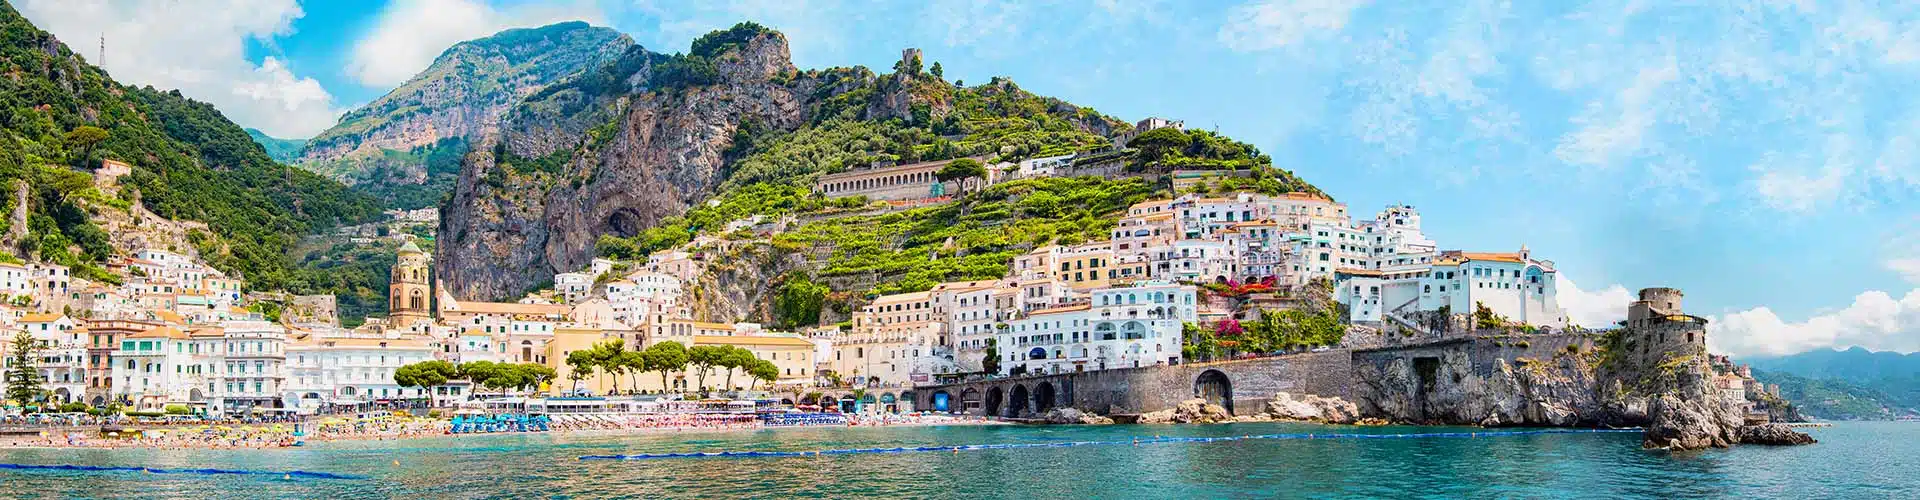 Panorama view of Amalfi Coast village in Italy with tiny beach and colorful houses on the hillside